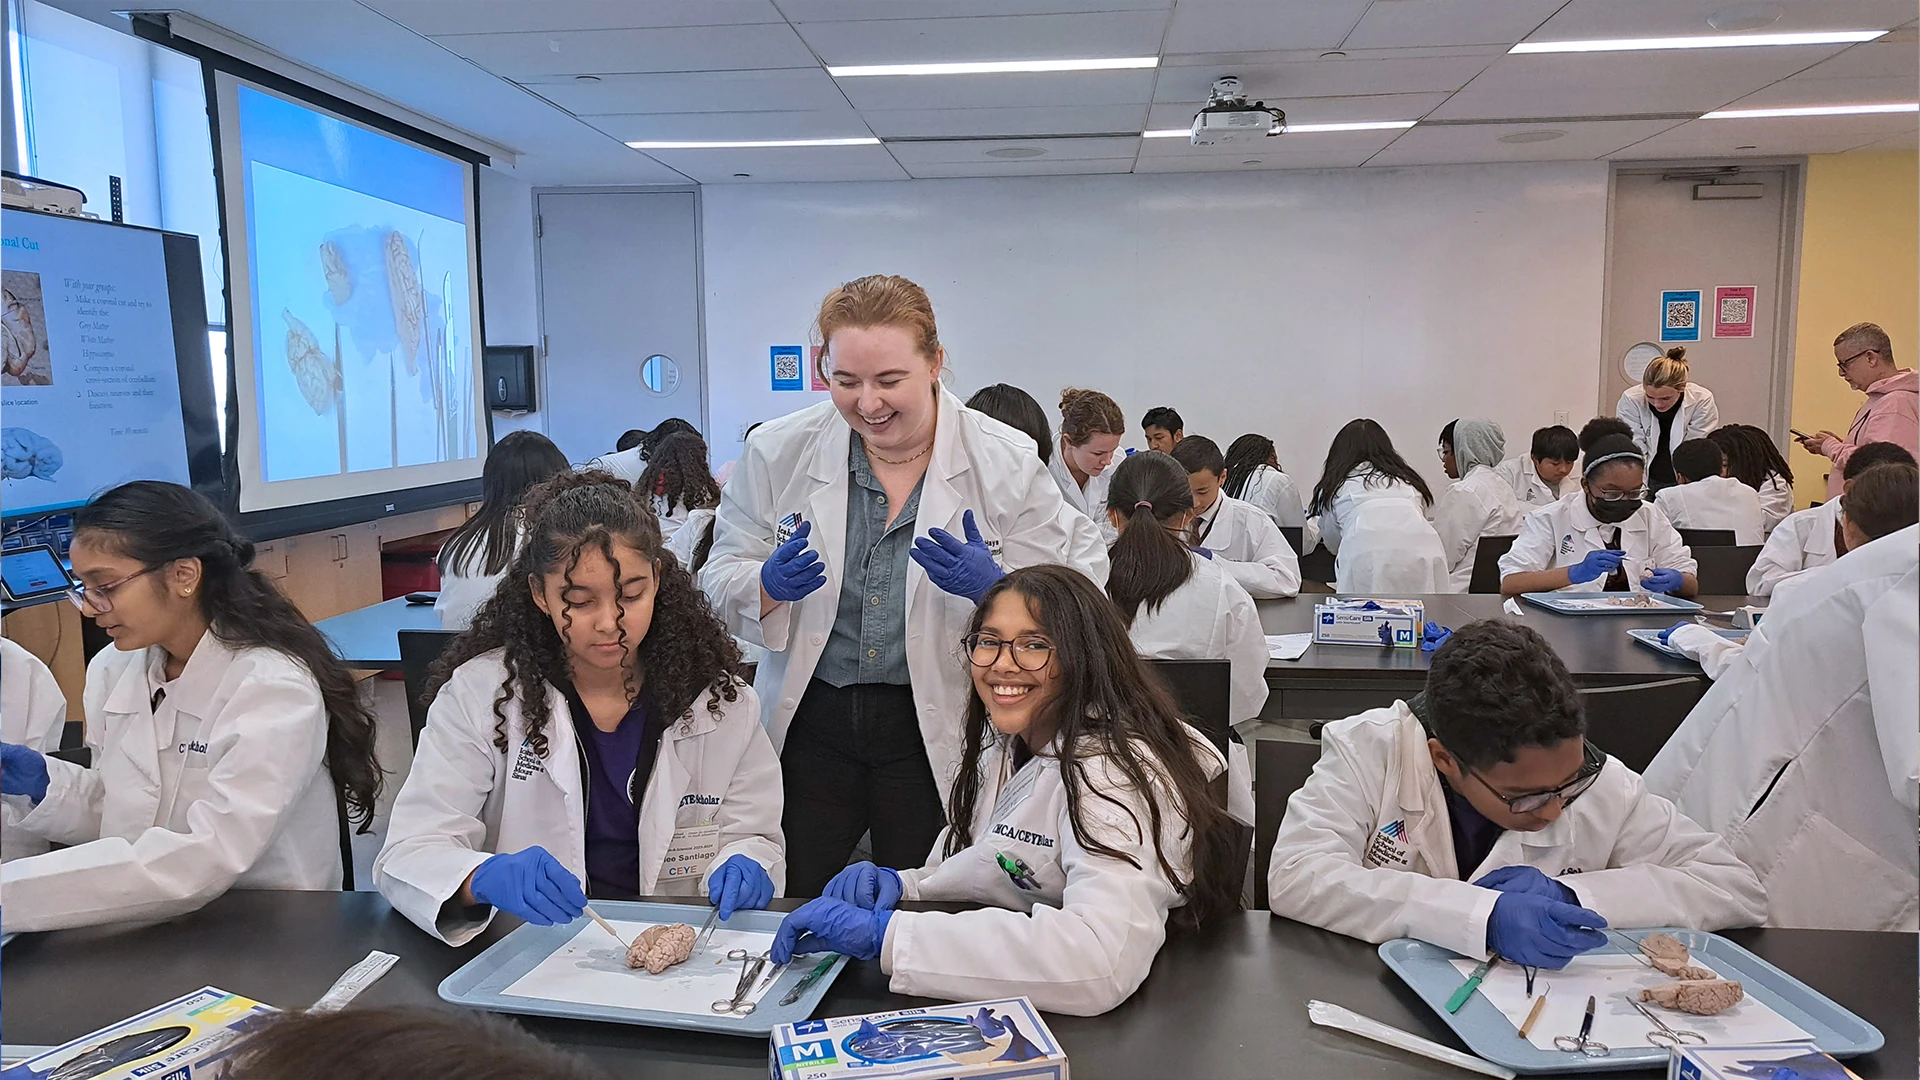 After an anatomy and pathology lesson, Day with a Scientist eighth grade students take a look at a brain for themselves. Guided by Emma Hays, a Neuroscience PhD student at Mount Sinai, students explore the lobes, ventricles, sulci, and gyri of a sheep brain.